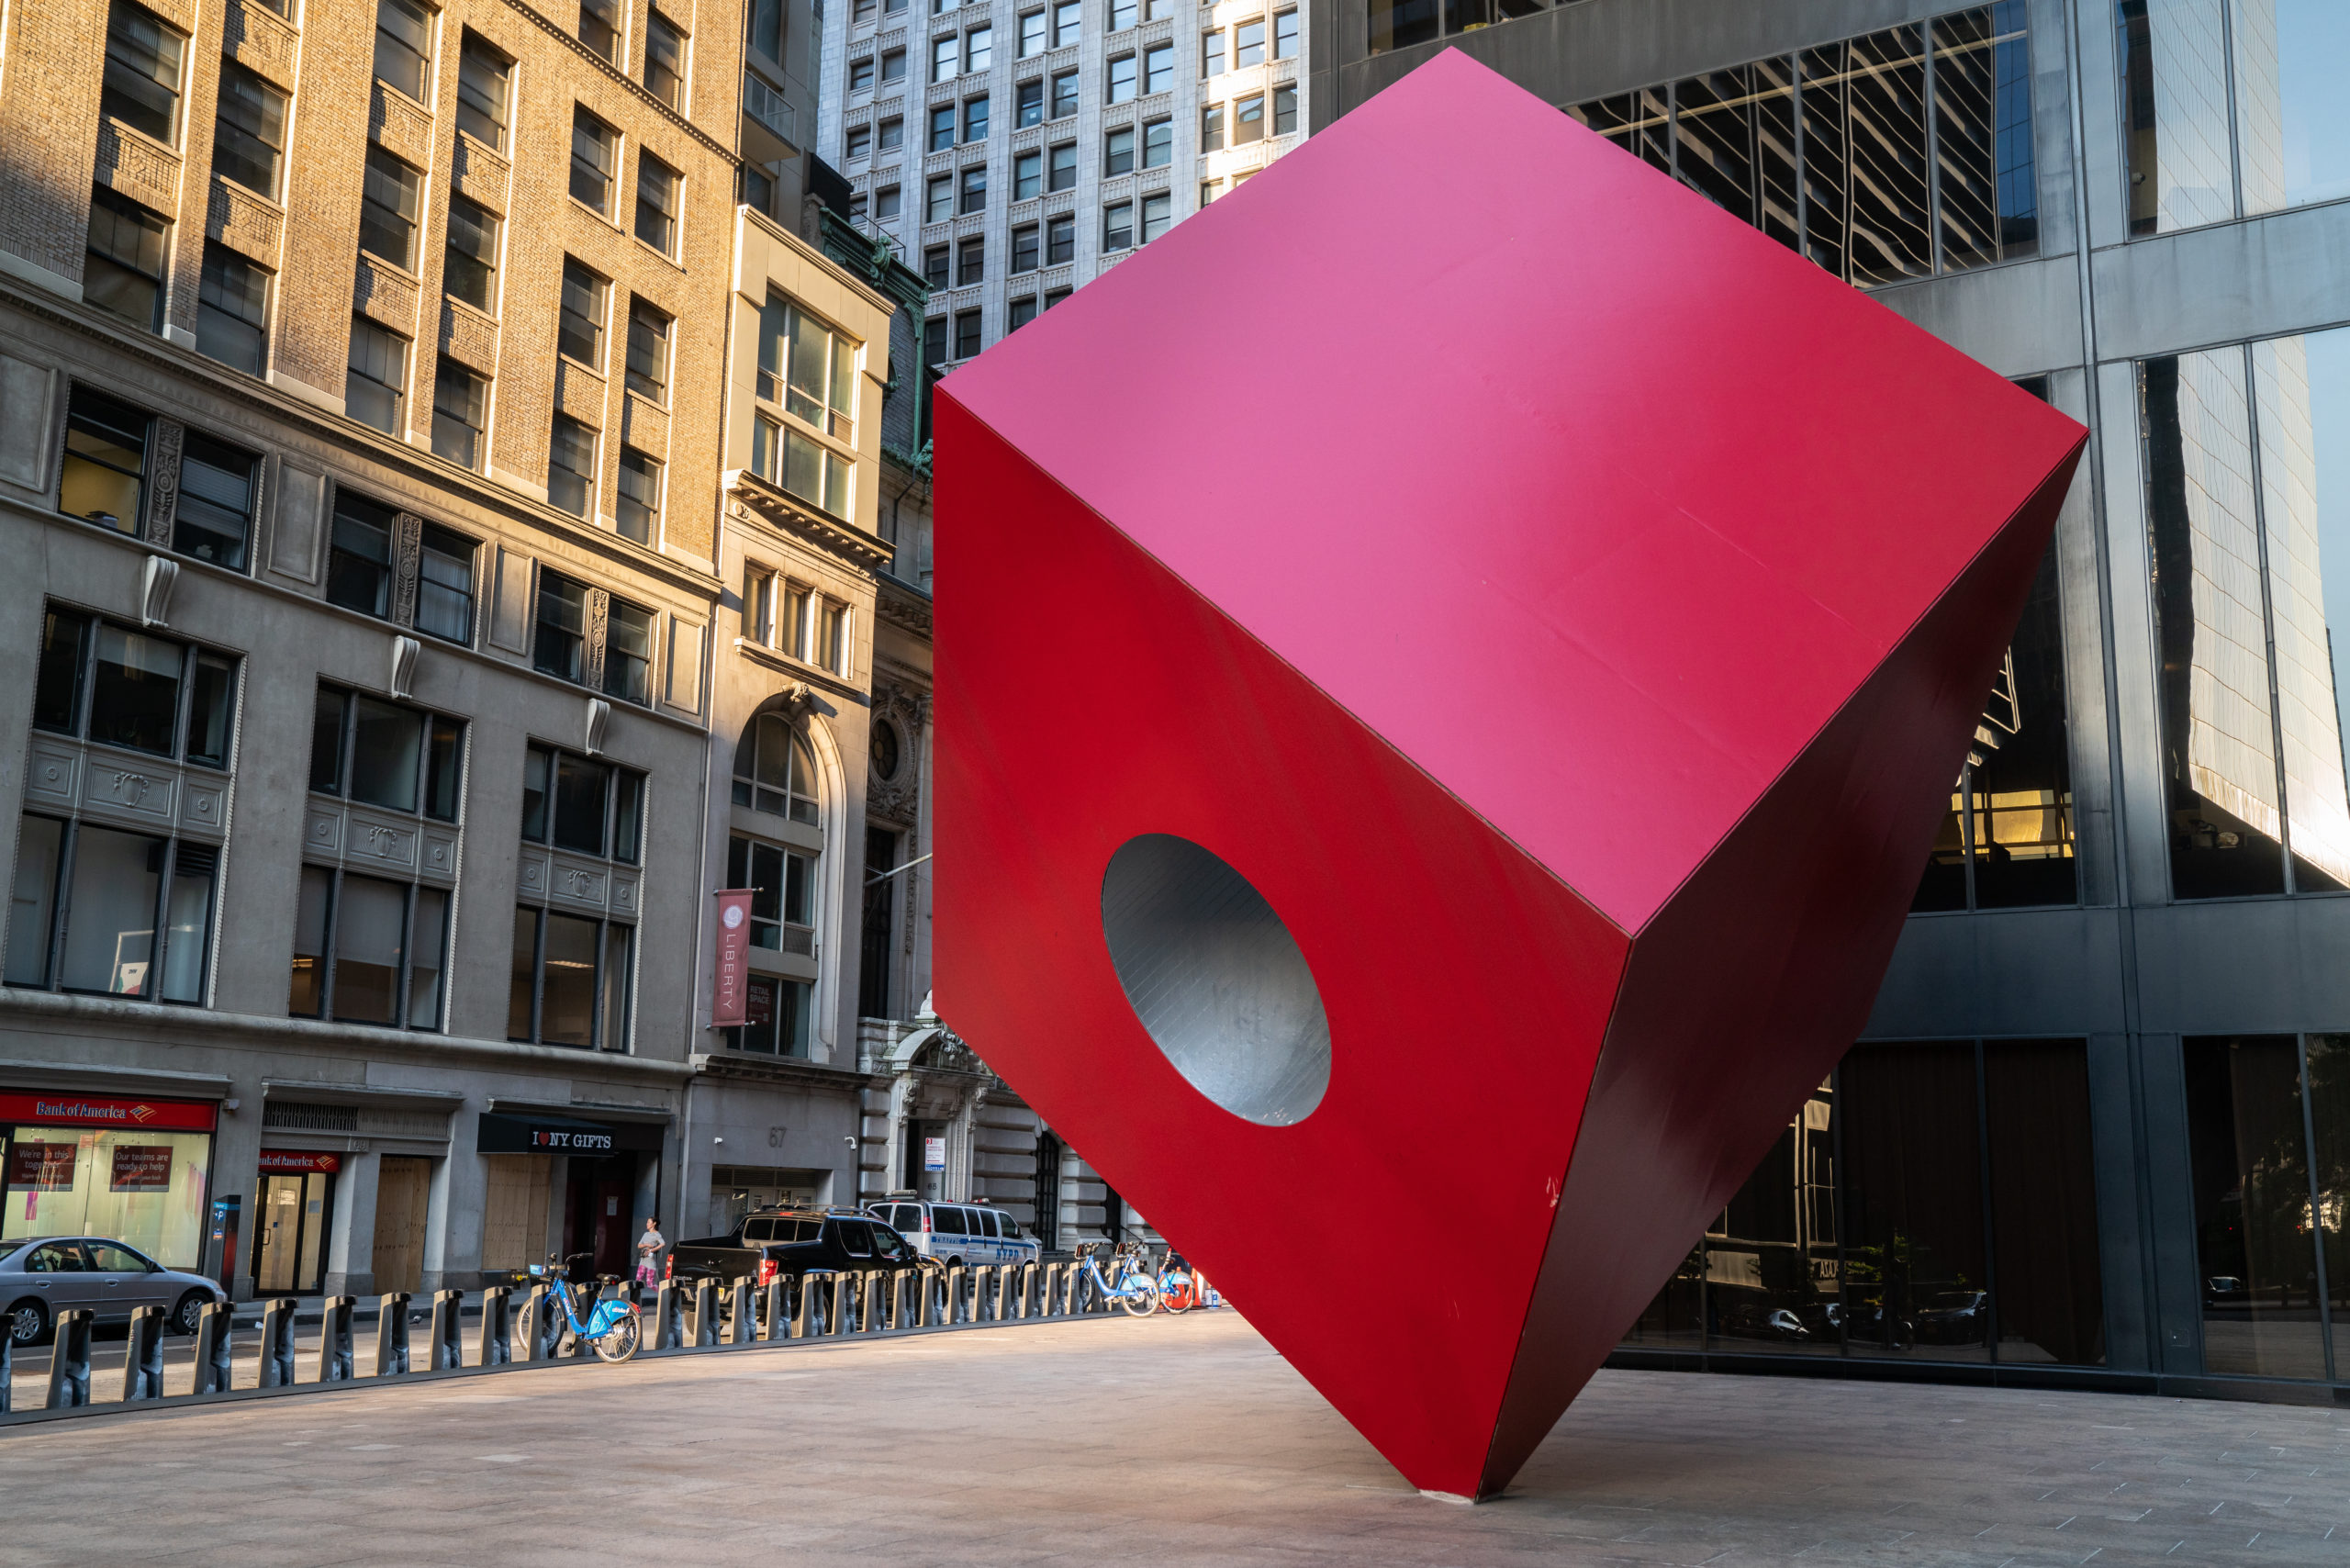 Isamu Red Cube sculpture A masterpiece in New York